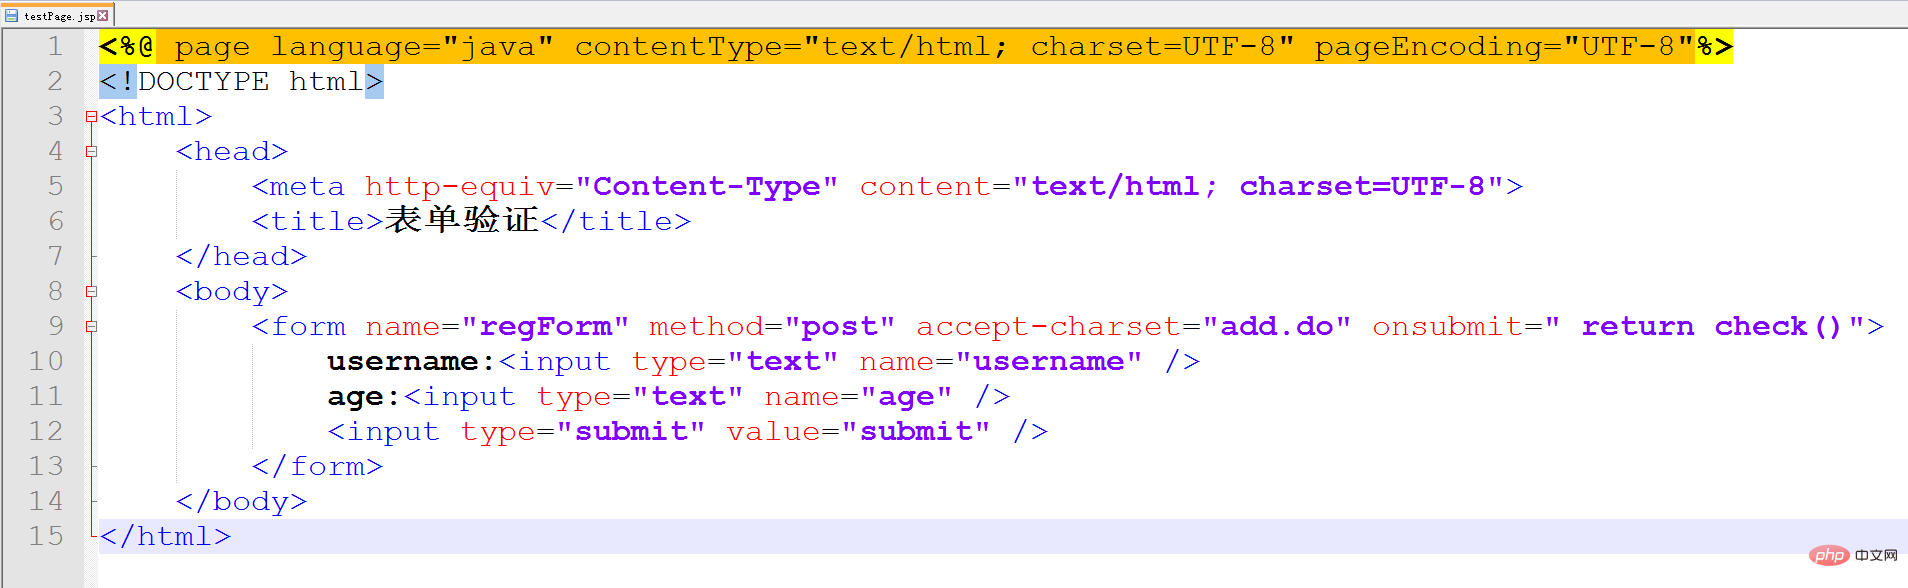 How to convert html to jsp